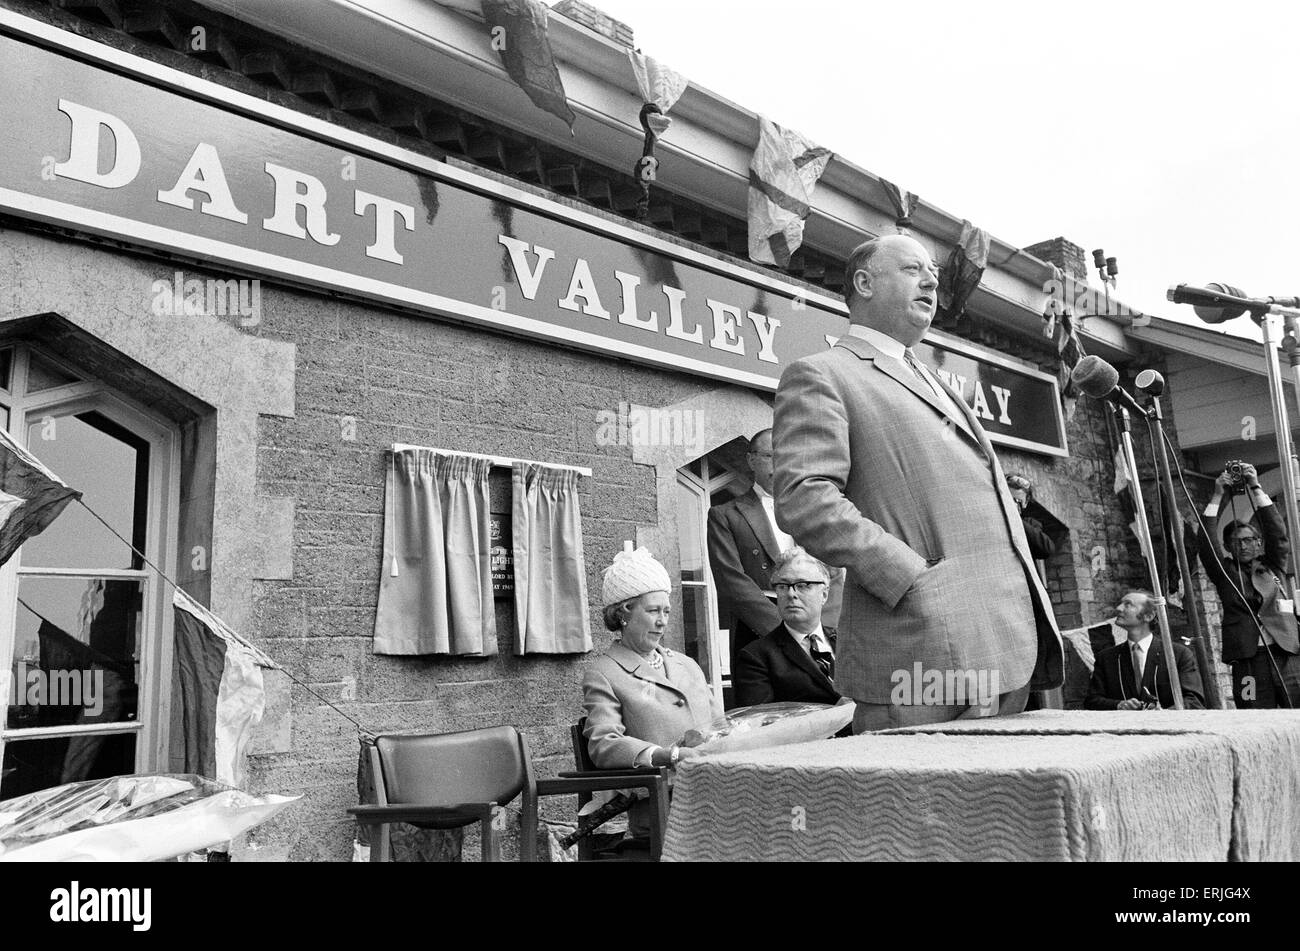 Dr Richard Beeching, Chairman of British Railways, reopens the Dart Valley Railway, South Devon Railway, 21st May 1969. He became a household name in Britain in the early 1960s for his report "The Reshaping of British Railways", commonly referred to as "The Beeching Report", which led to far-reaching changes in the railway network, popularly known as the Beeching Axe. Stock Photo